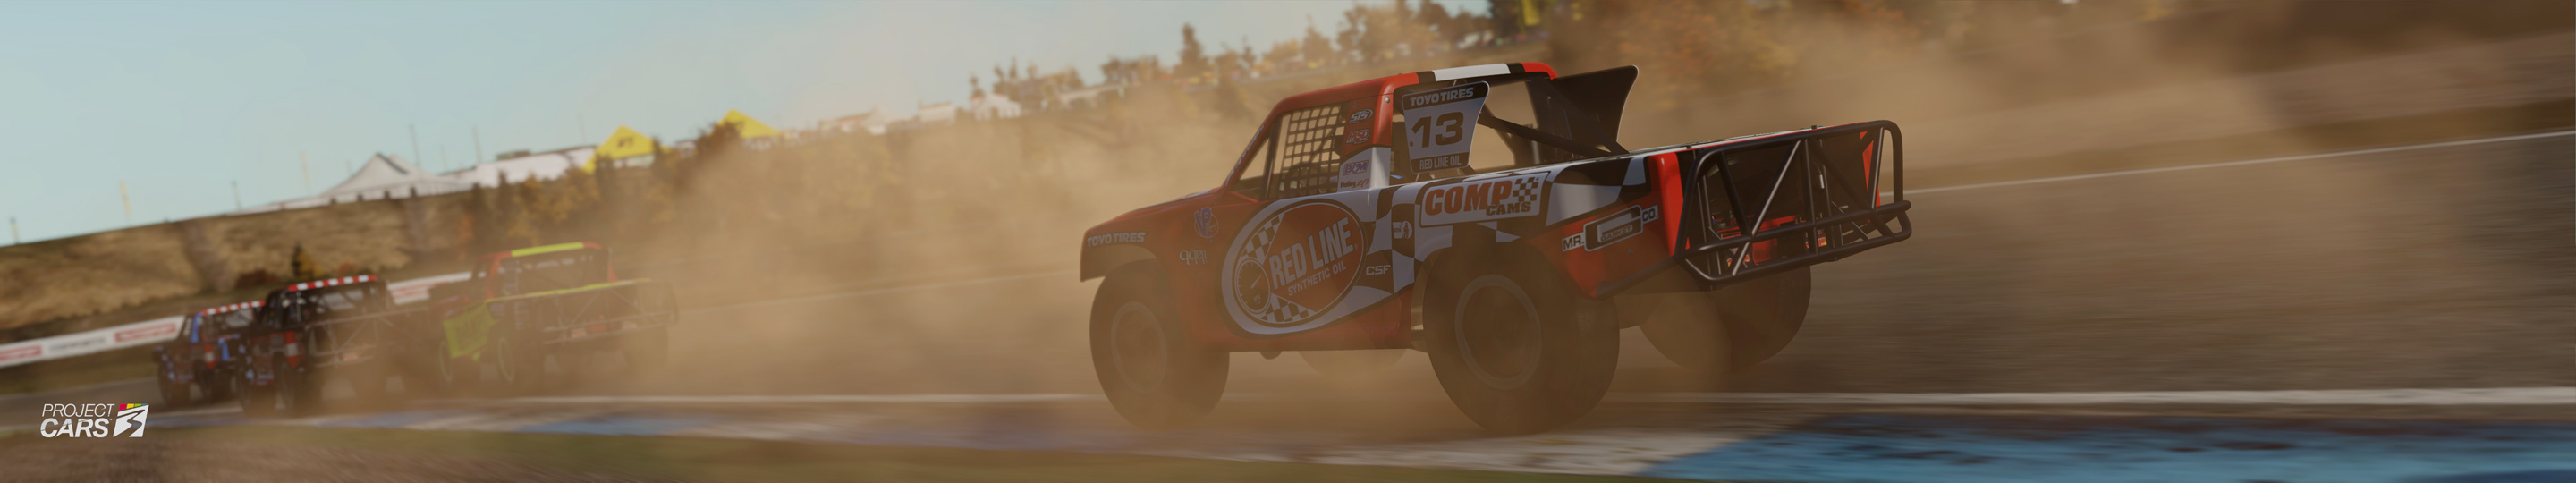 0 PROJECT CARS 3 SUPER TRUCK at KNOCKHILL copy.jpg